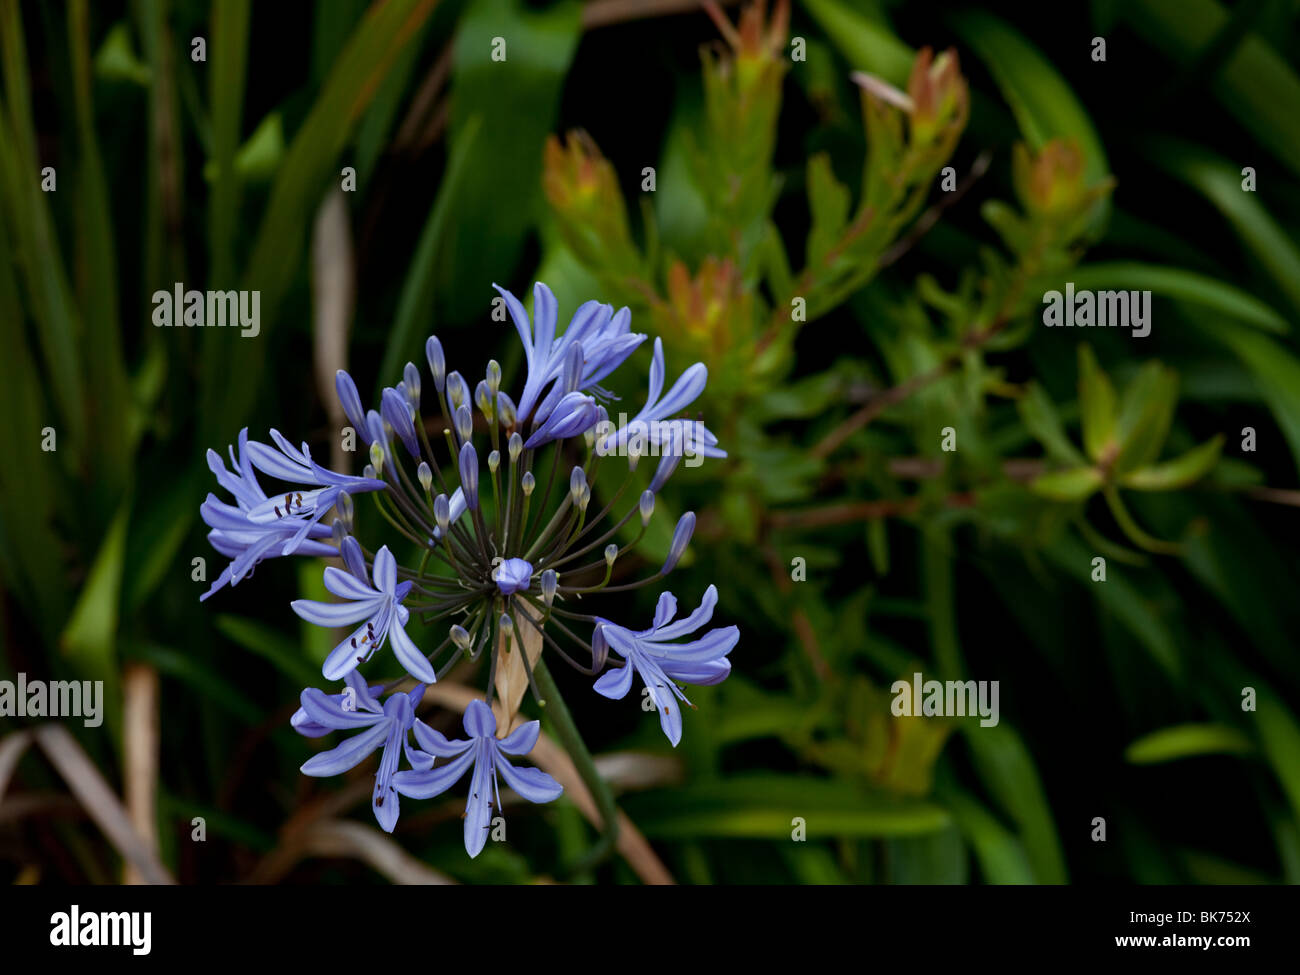 Agapanthus flower in bloom Stock Photo